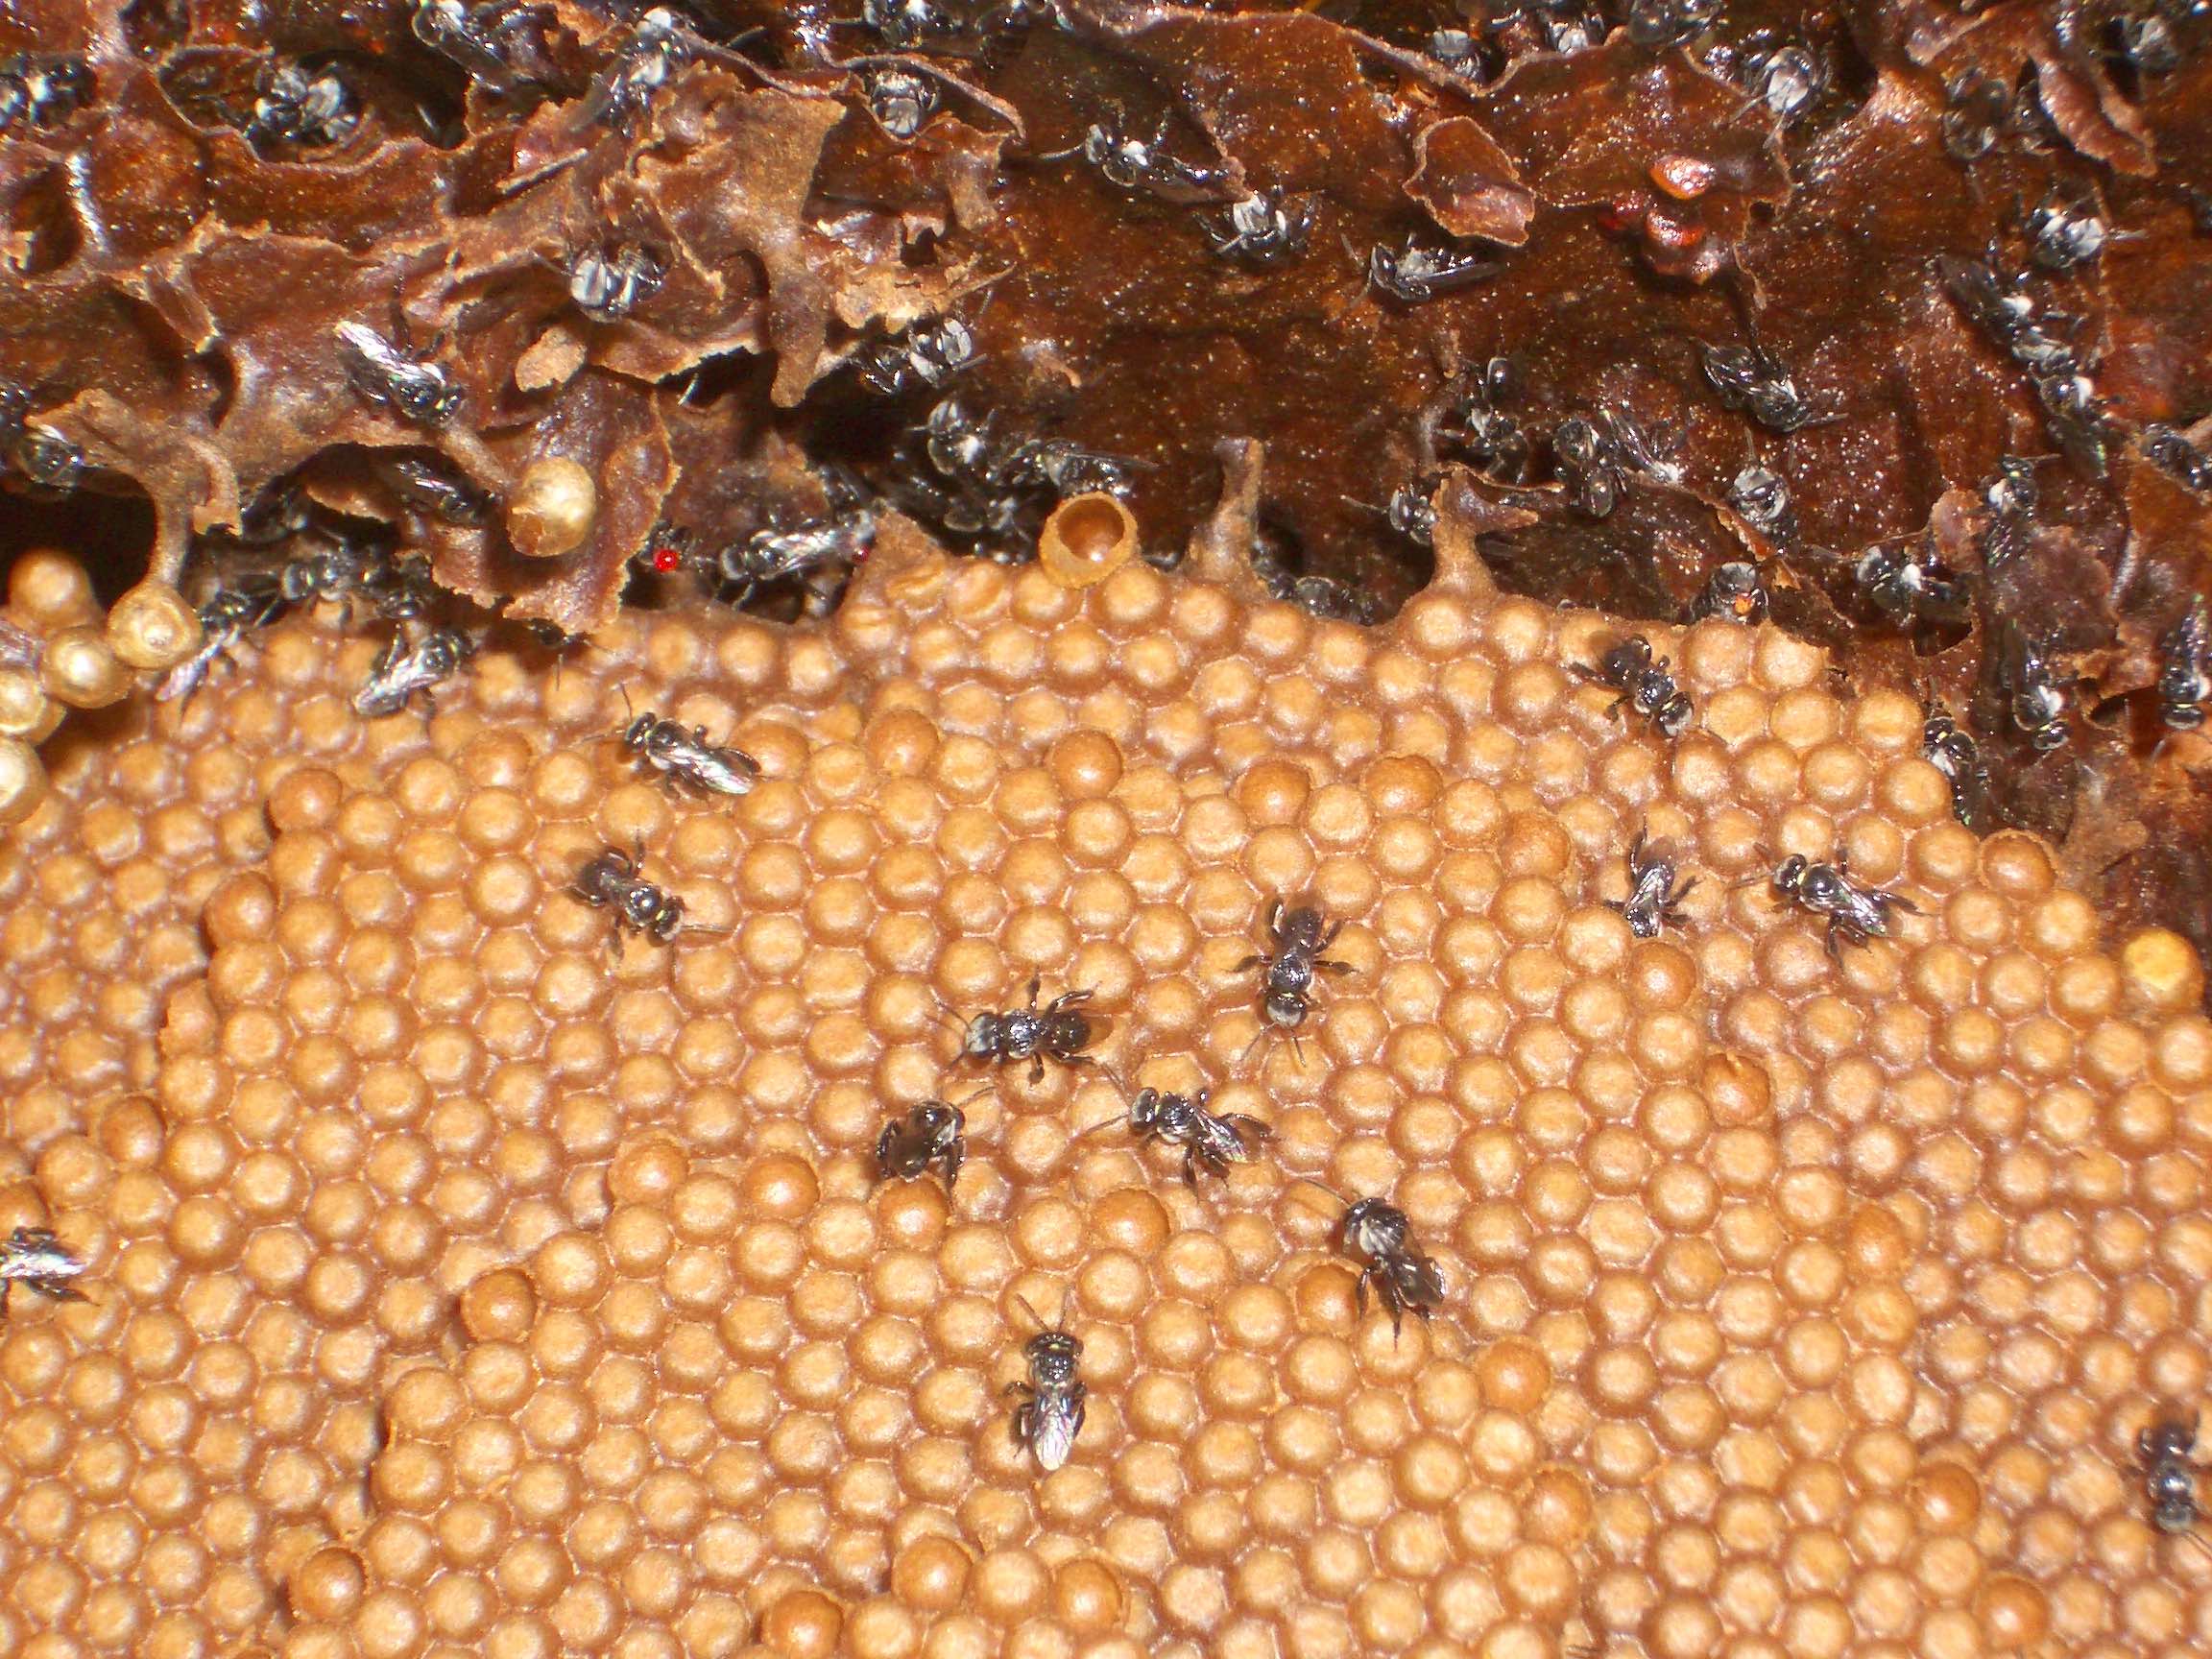 Stingless bees in a hive